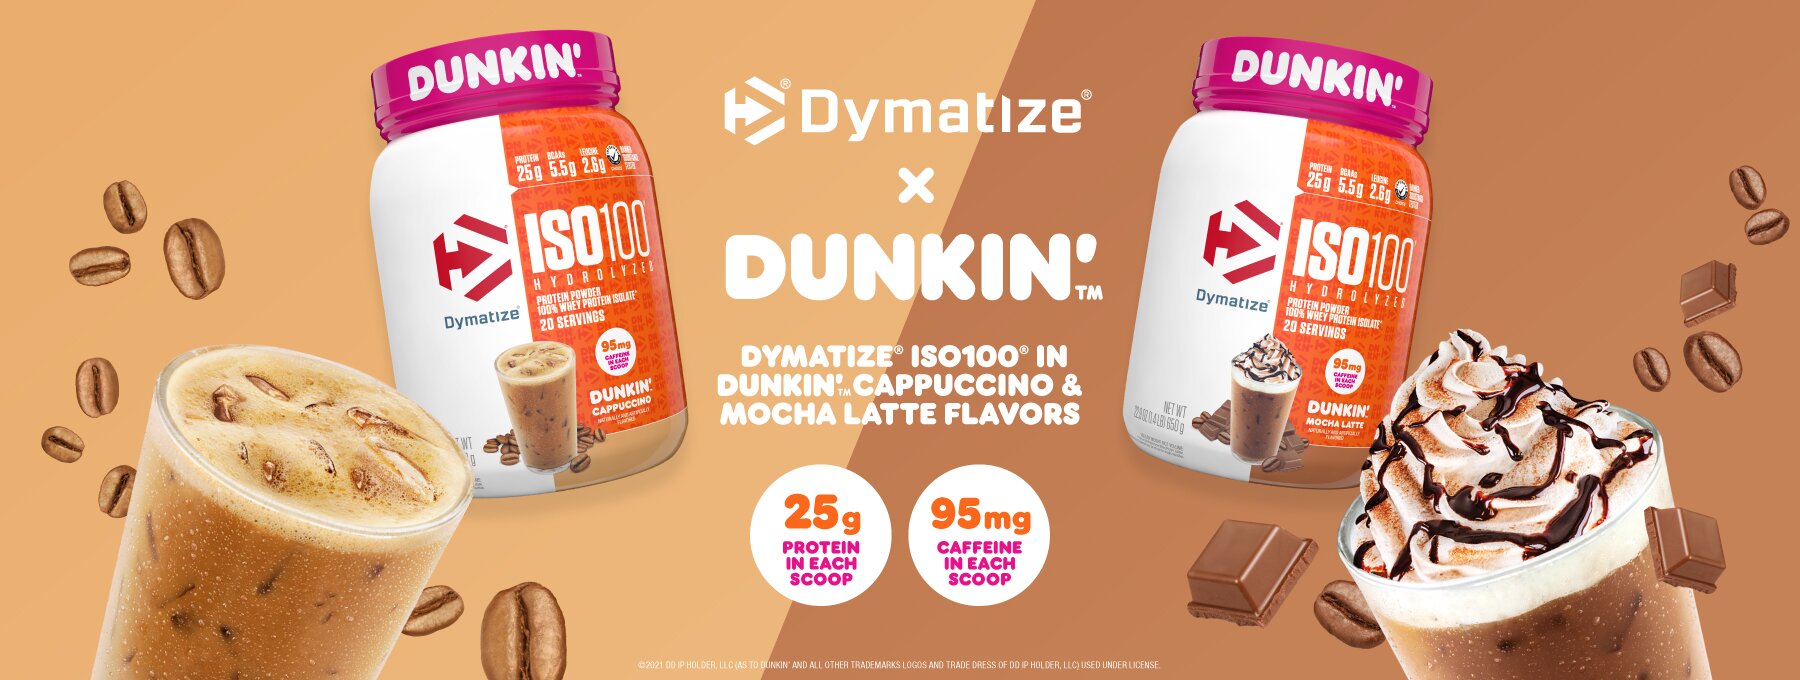 BBcom ISO100 Dunkin Adverts v2.5 landing 1800x680 Fueling Your Body 24 Hours a Day